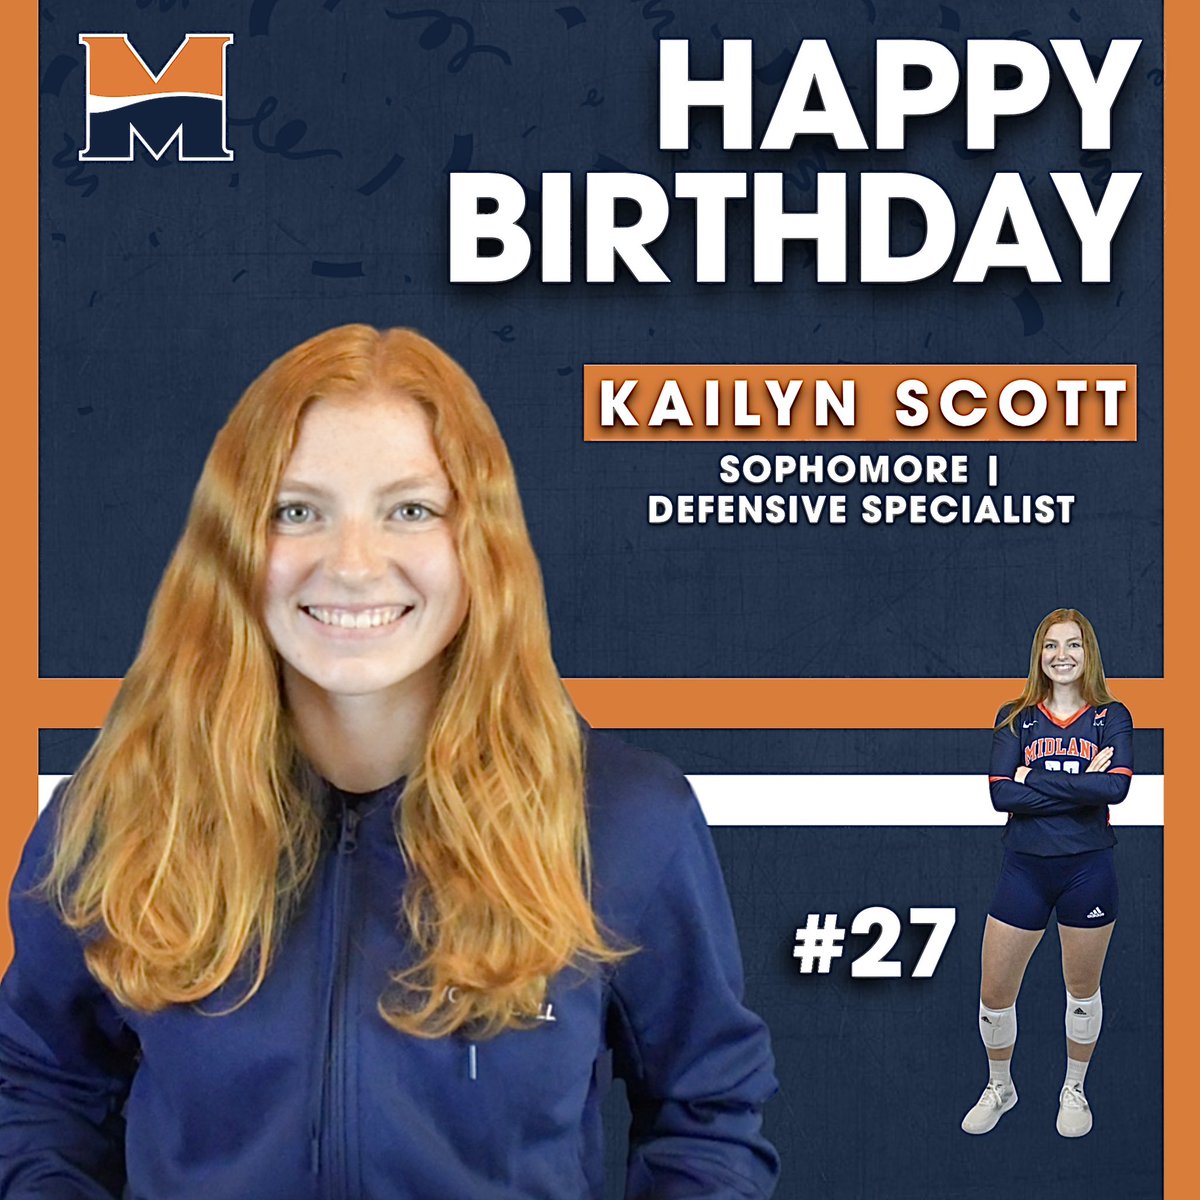 Great Scott, it’s your birthday! 😎 Wishing sophomore Kailyn Scott a very happy birthday. Have a great day celebrating YOU! 🥳